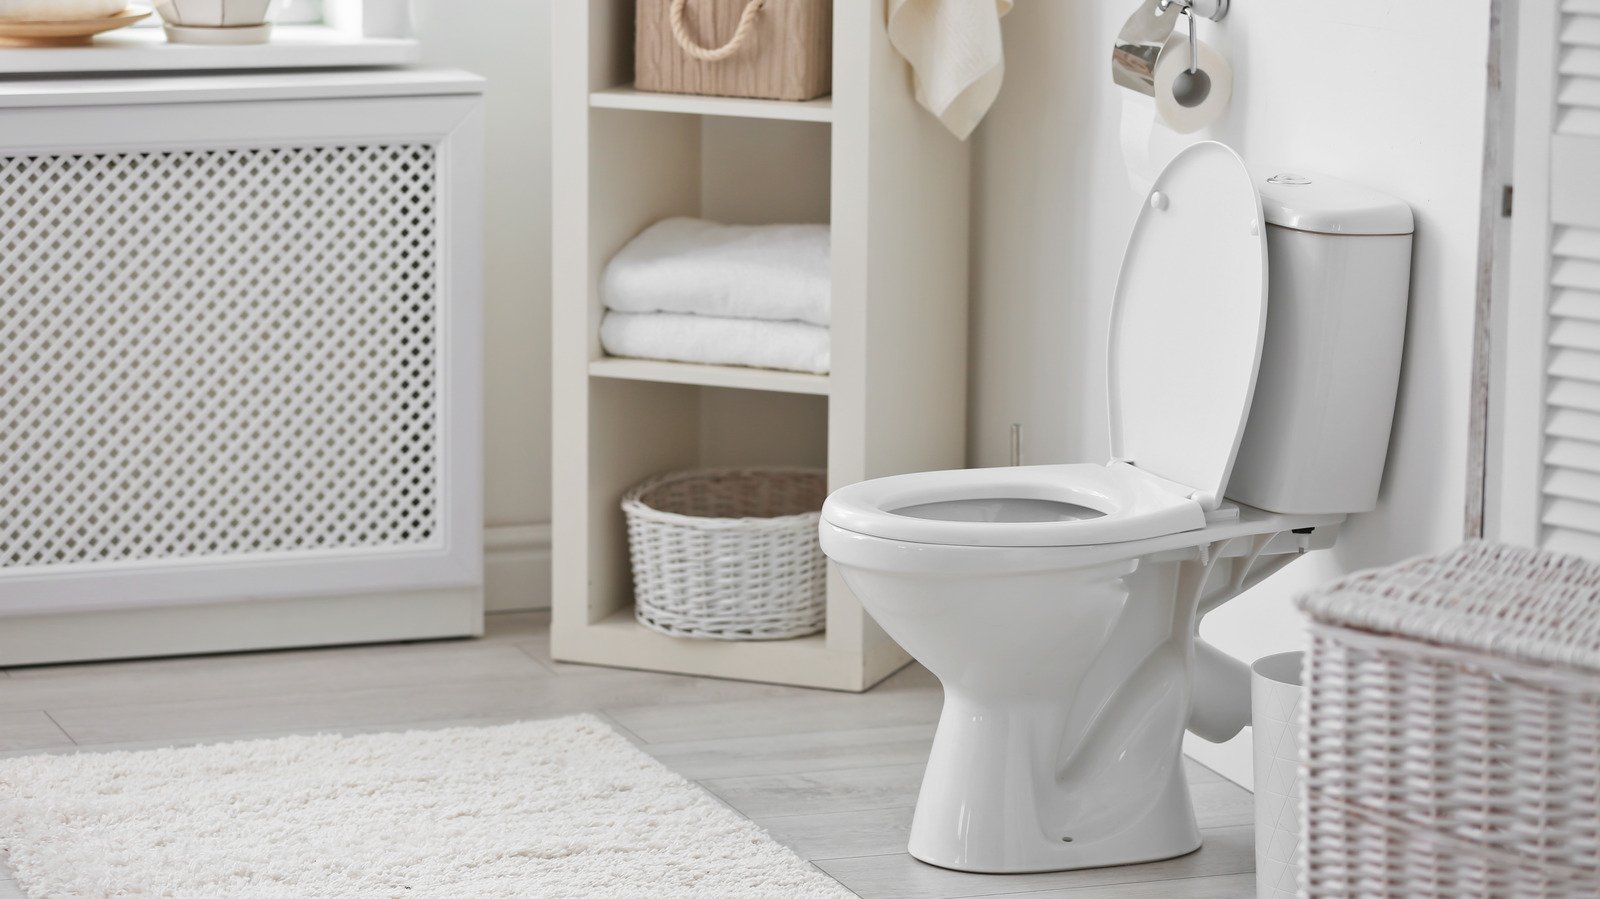 Why You Should Never Flush With The Toilet Seat Up - Health Digest